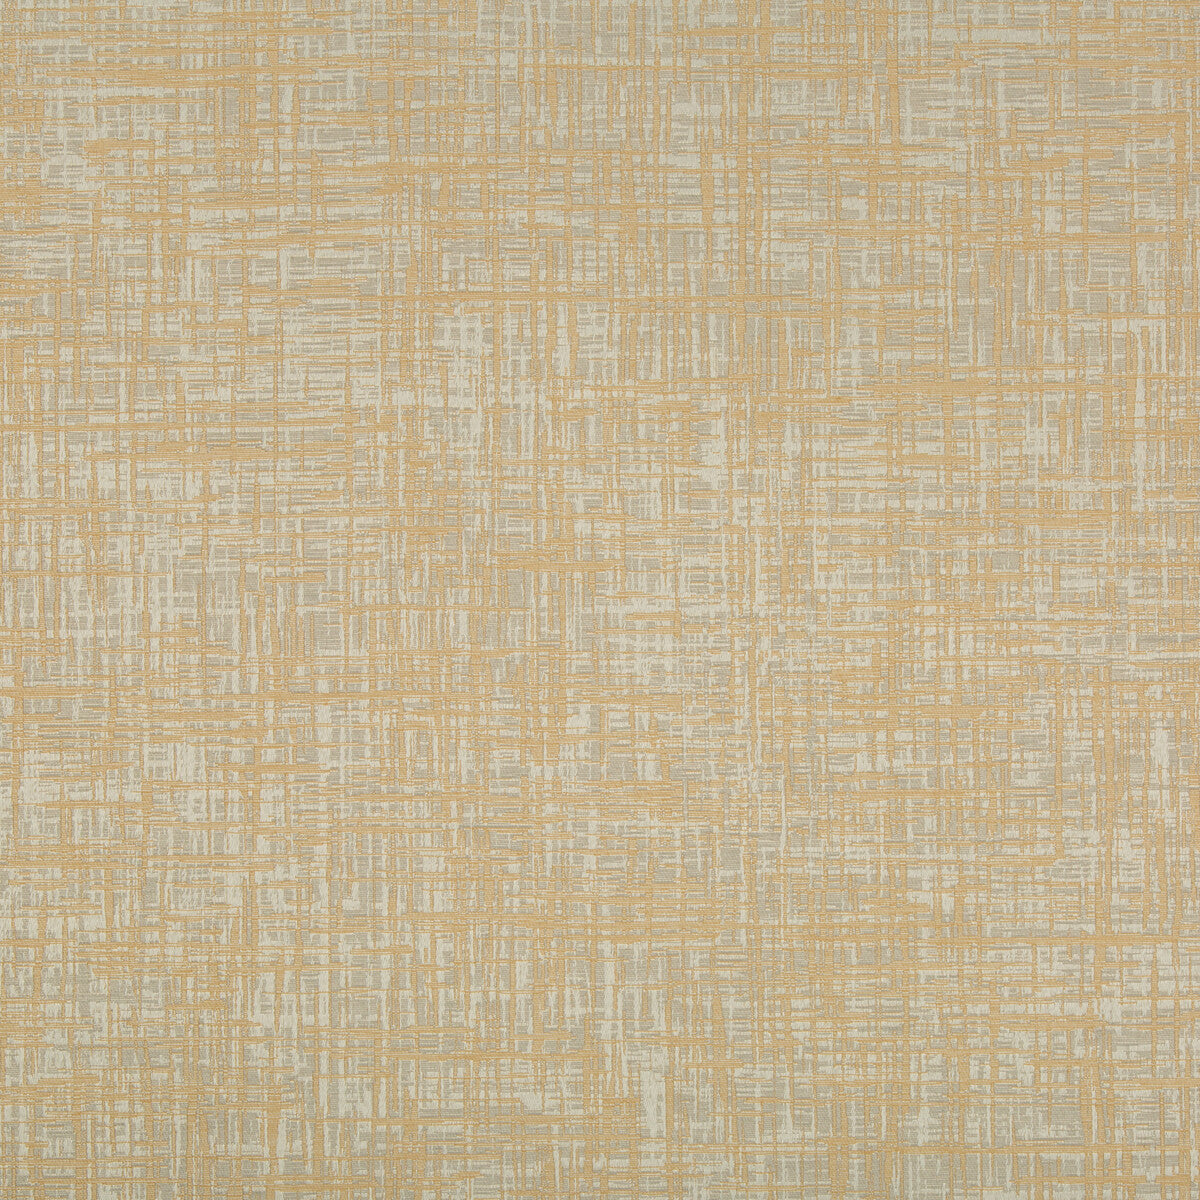 Dejo fabric in butterscotch color - pattern 35045.411.0 - by Kravet Contract in the Gis Crypton collection